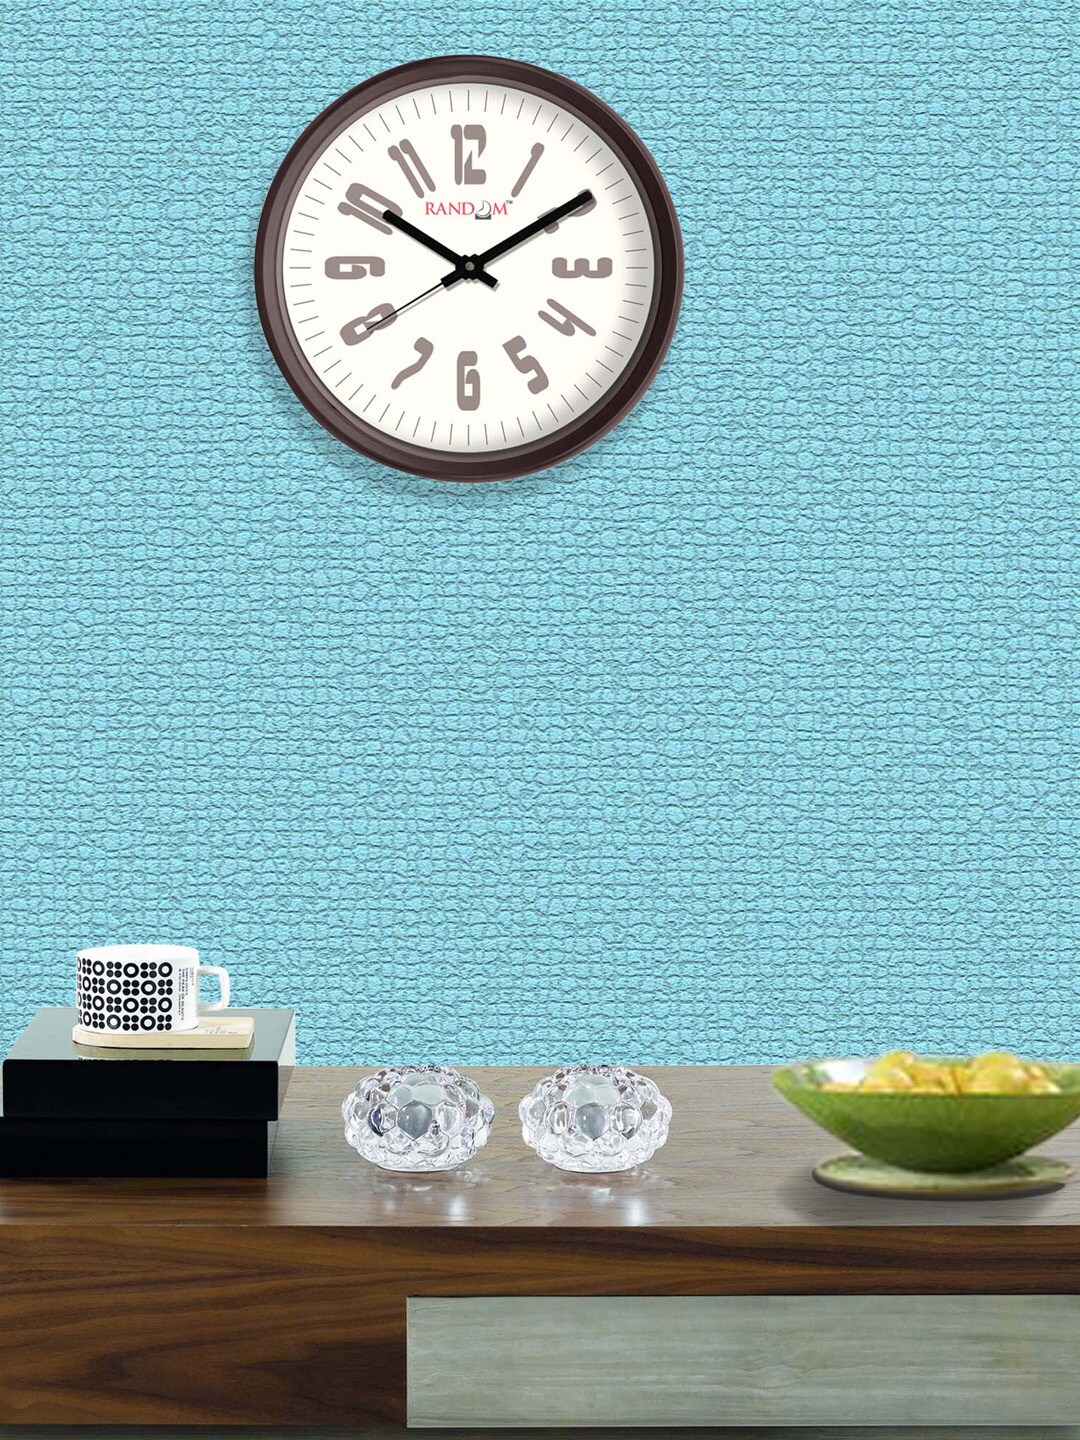 RANDOM White Round Solid Analogue Wall Clock Price in India